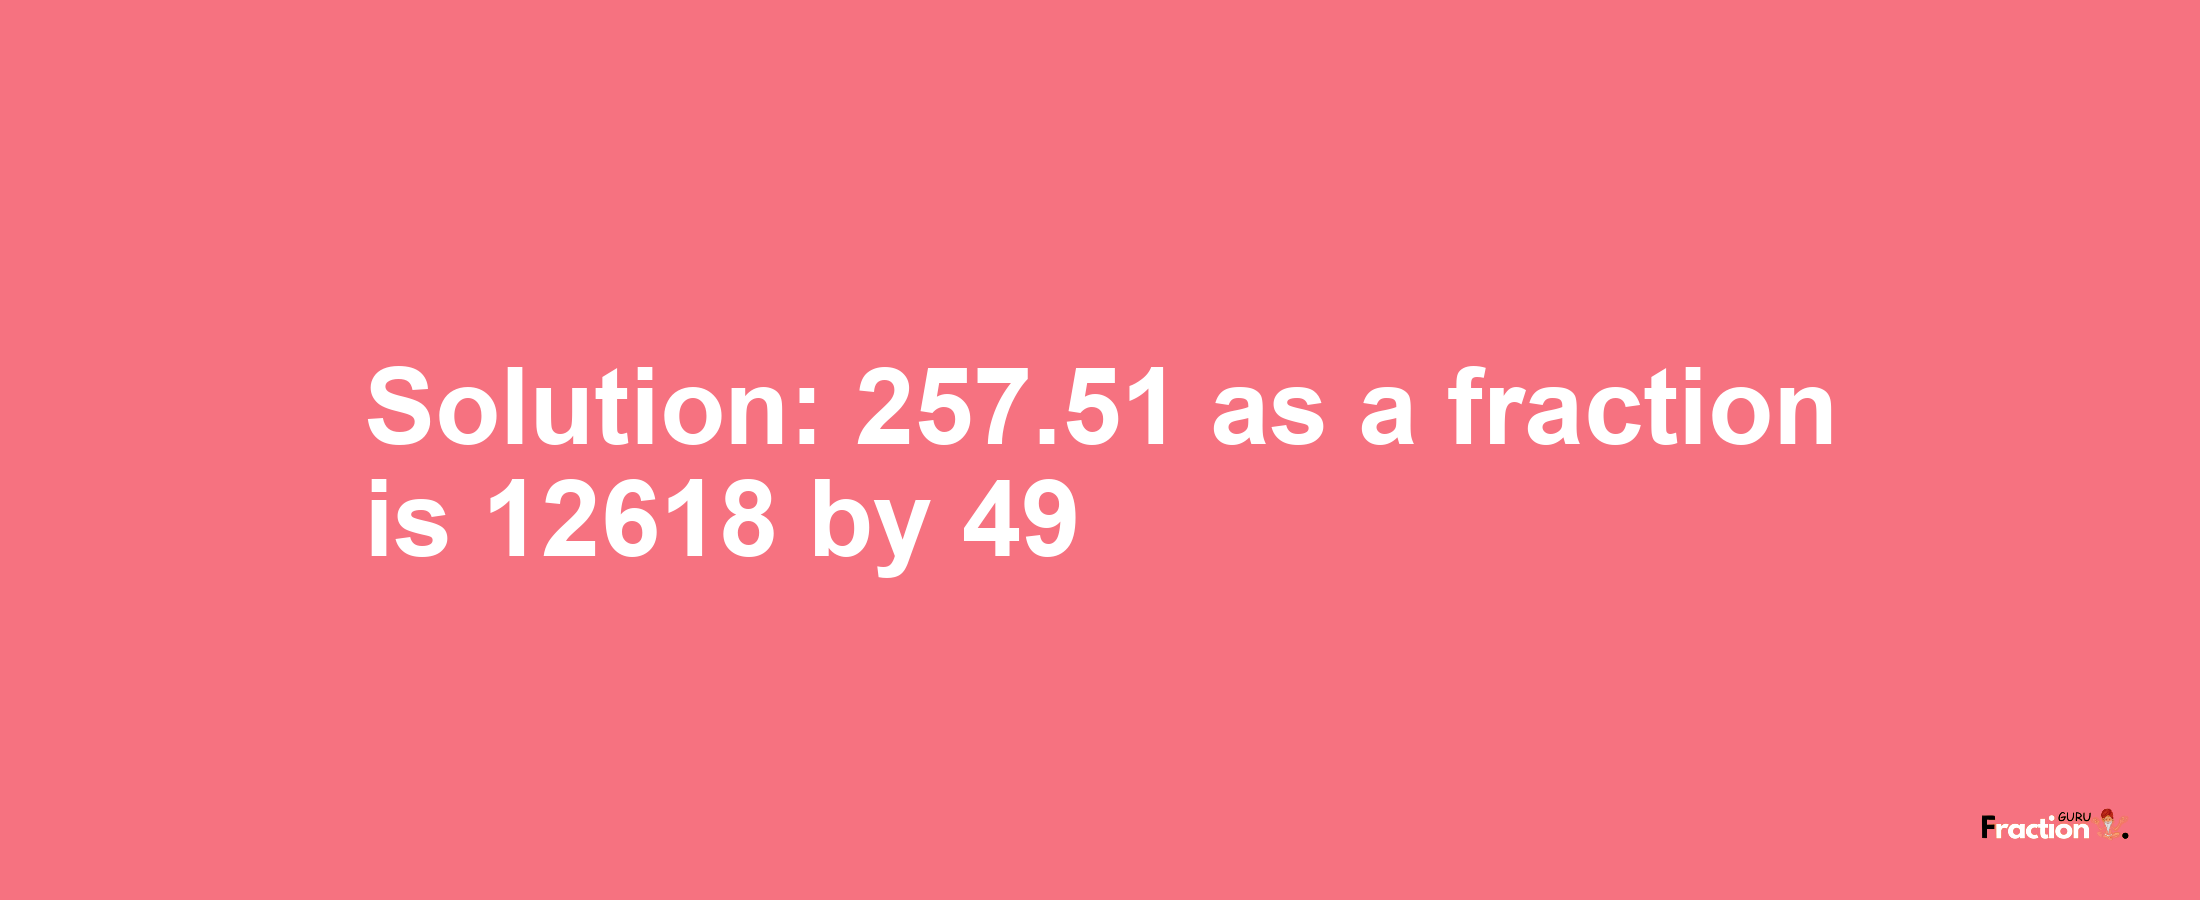 Solution:257.51 as a fraction is 12618/49